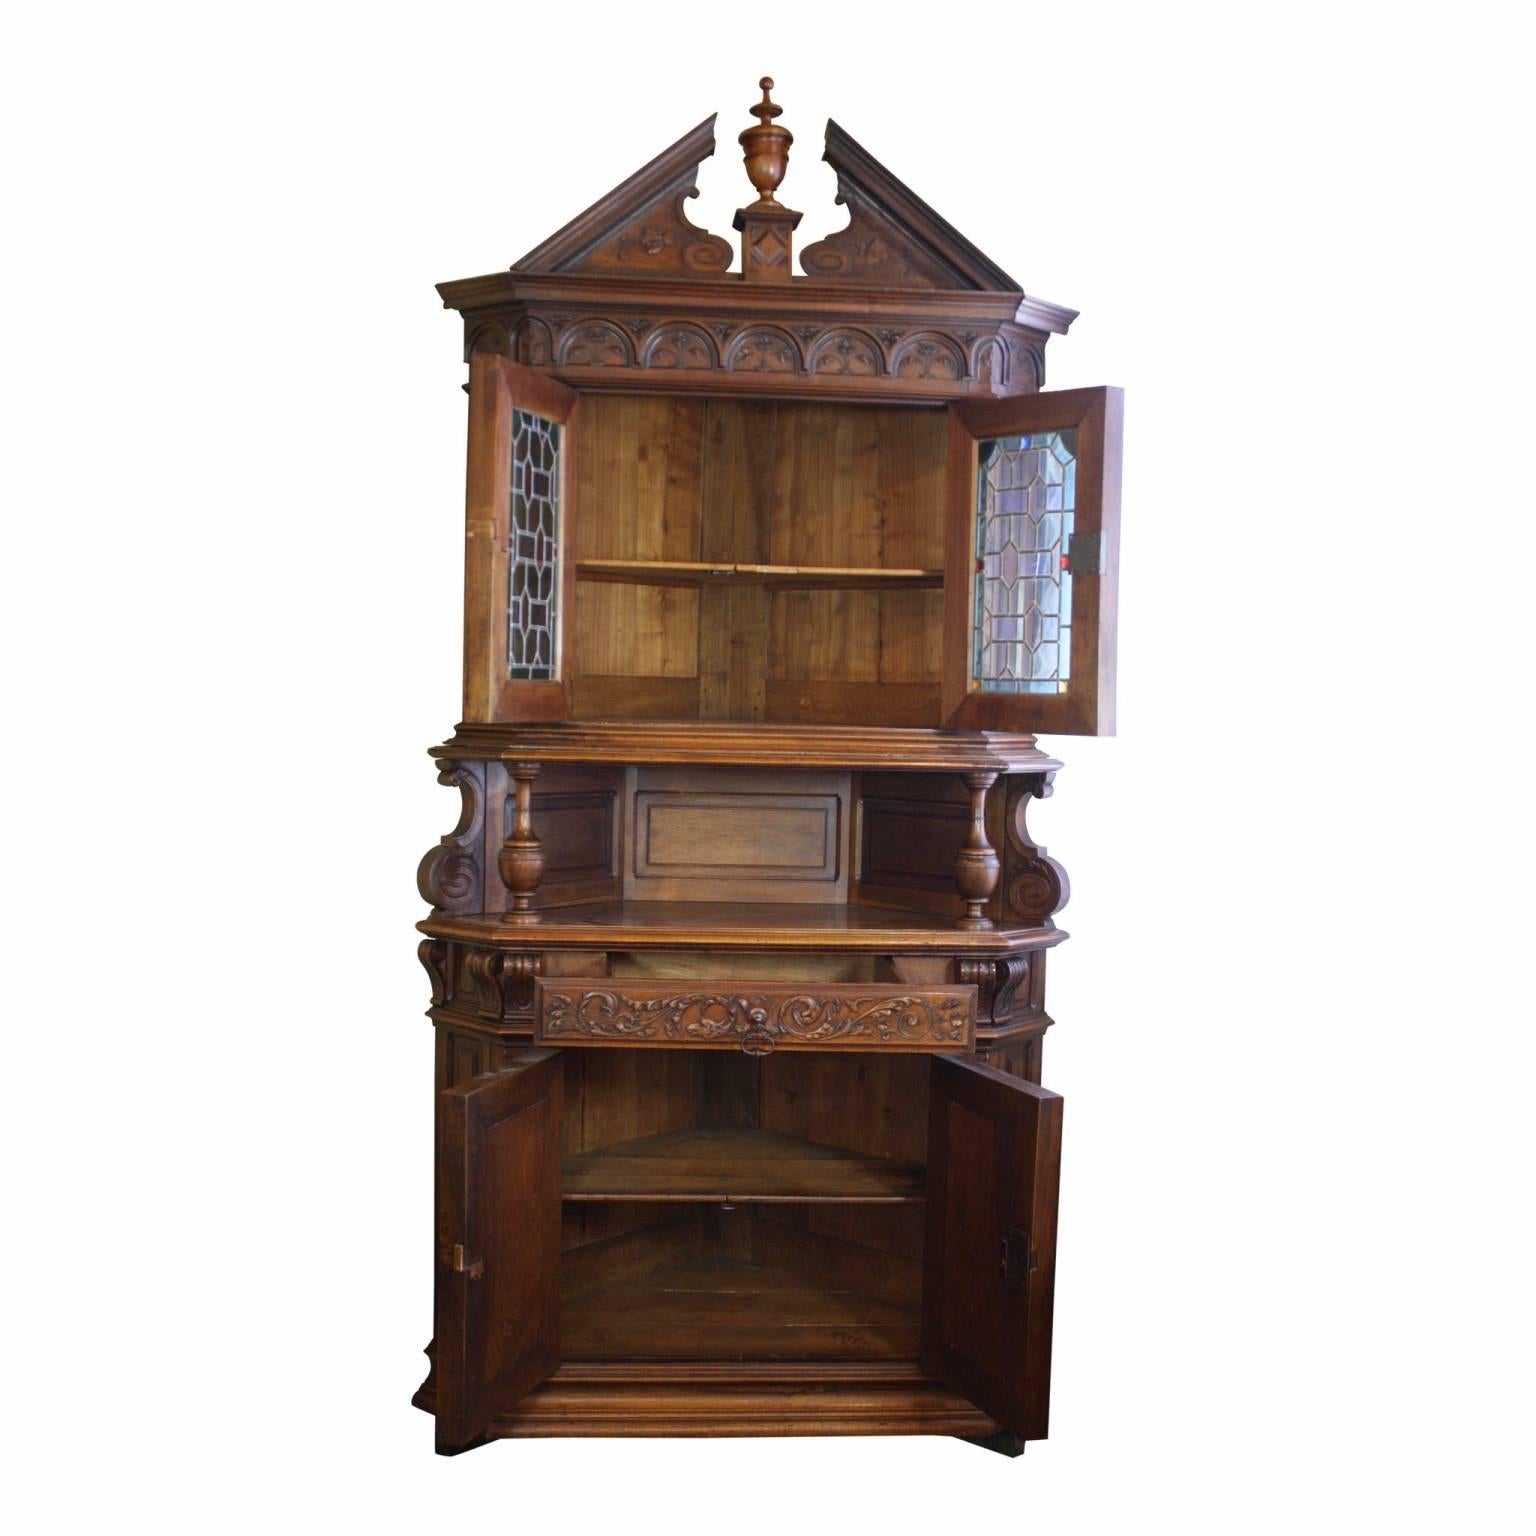 Leaded glass doors accented with blue, red, and gold stained glass are featured on this walnut corner cabinet. The relief carvings of foliage, flowers, and crests, which are masterfully incorporated into the cabinet's design, create a stunning